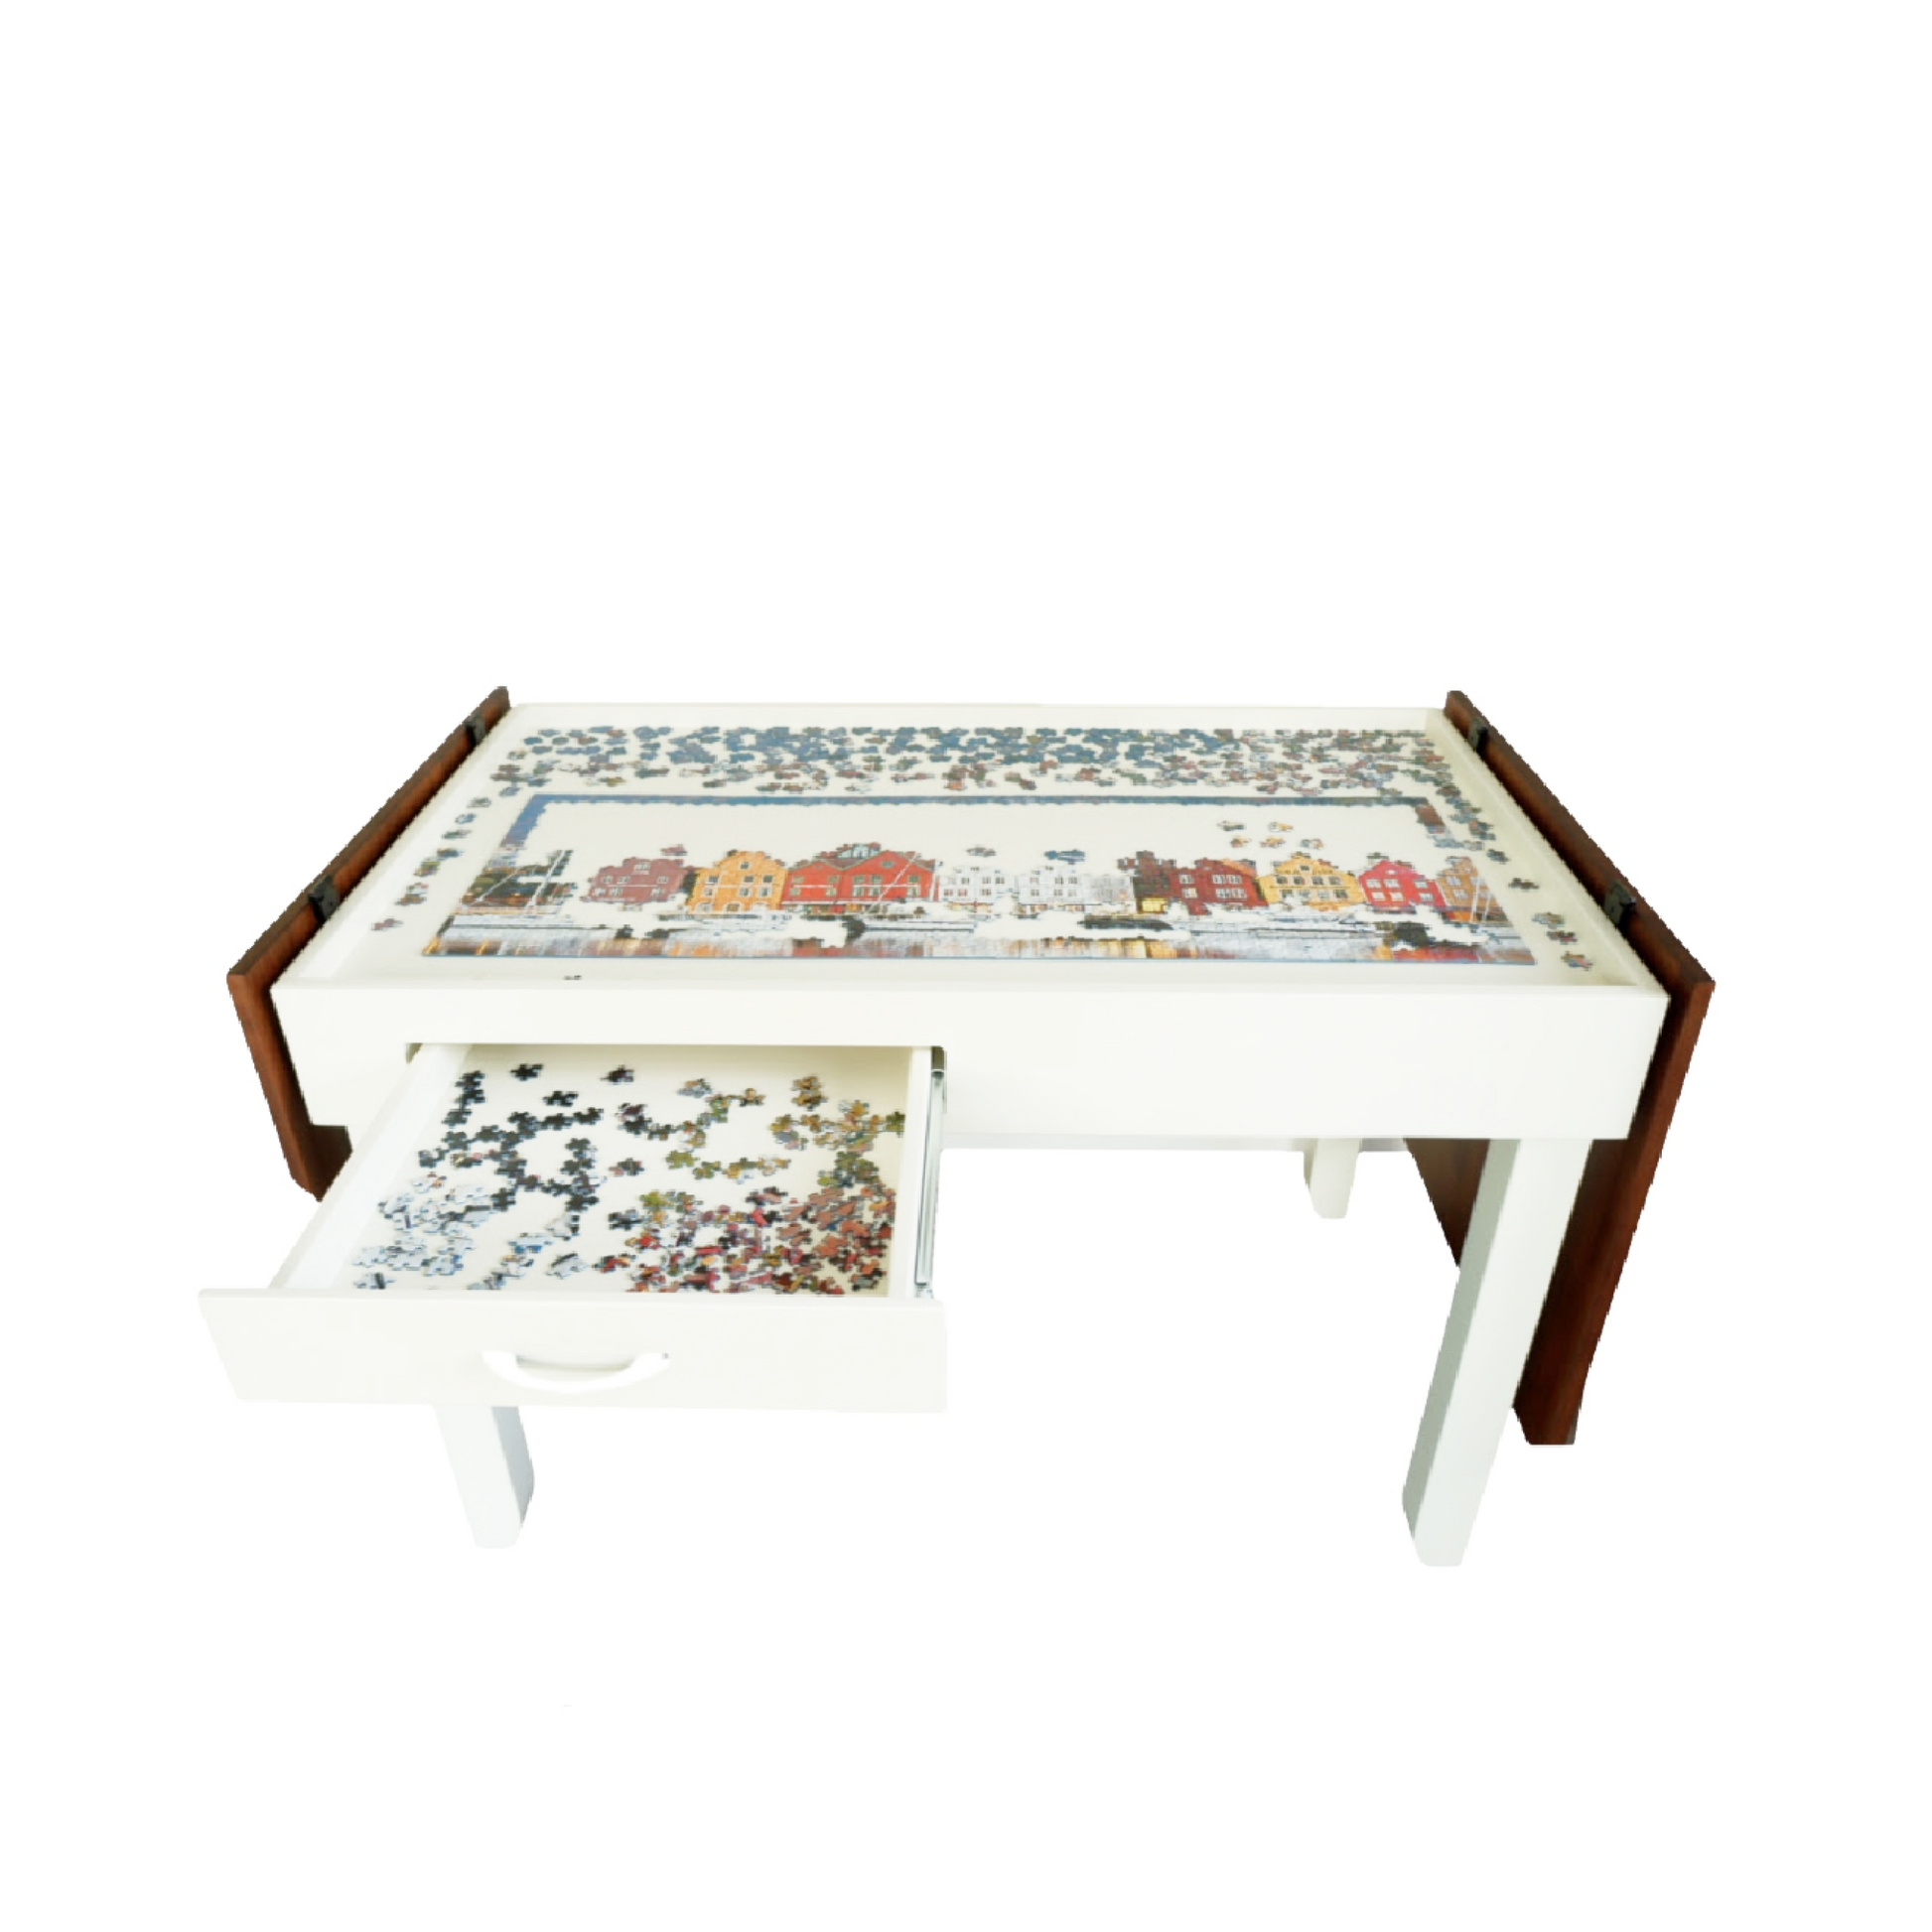 ATDAWN 1000 Pieces Wooden Puzzle Table, Jigsaw Puzzle Table